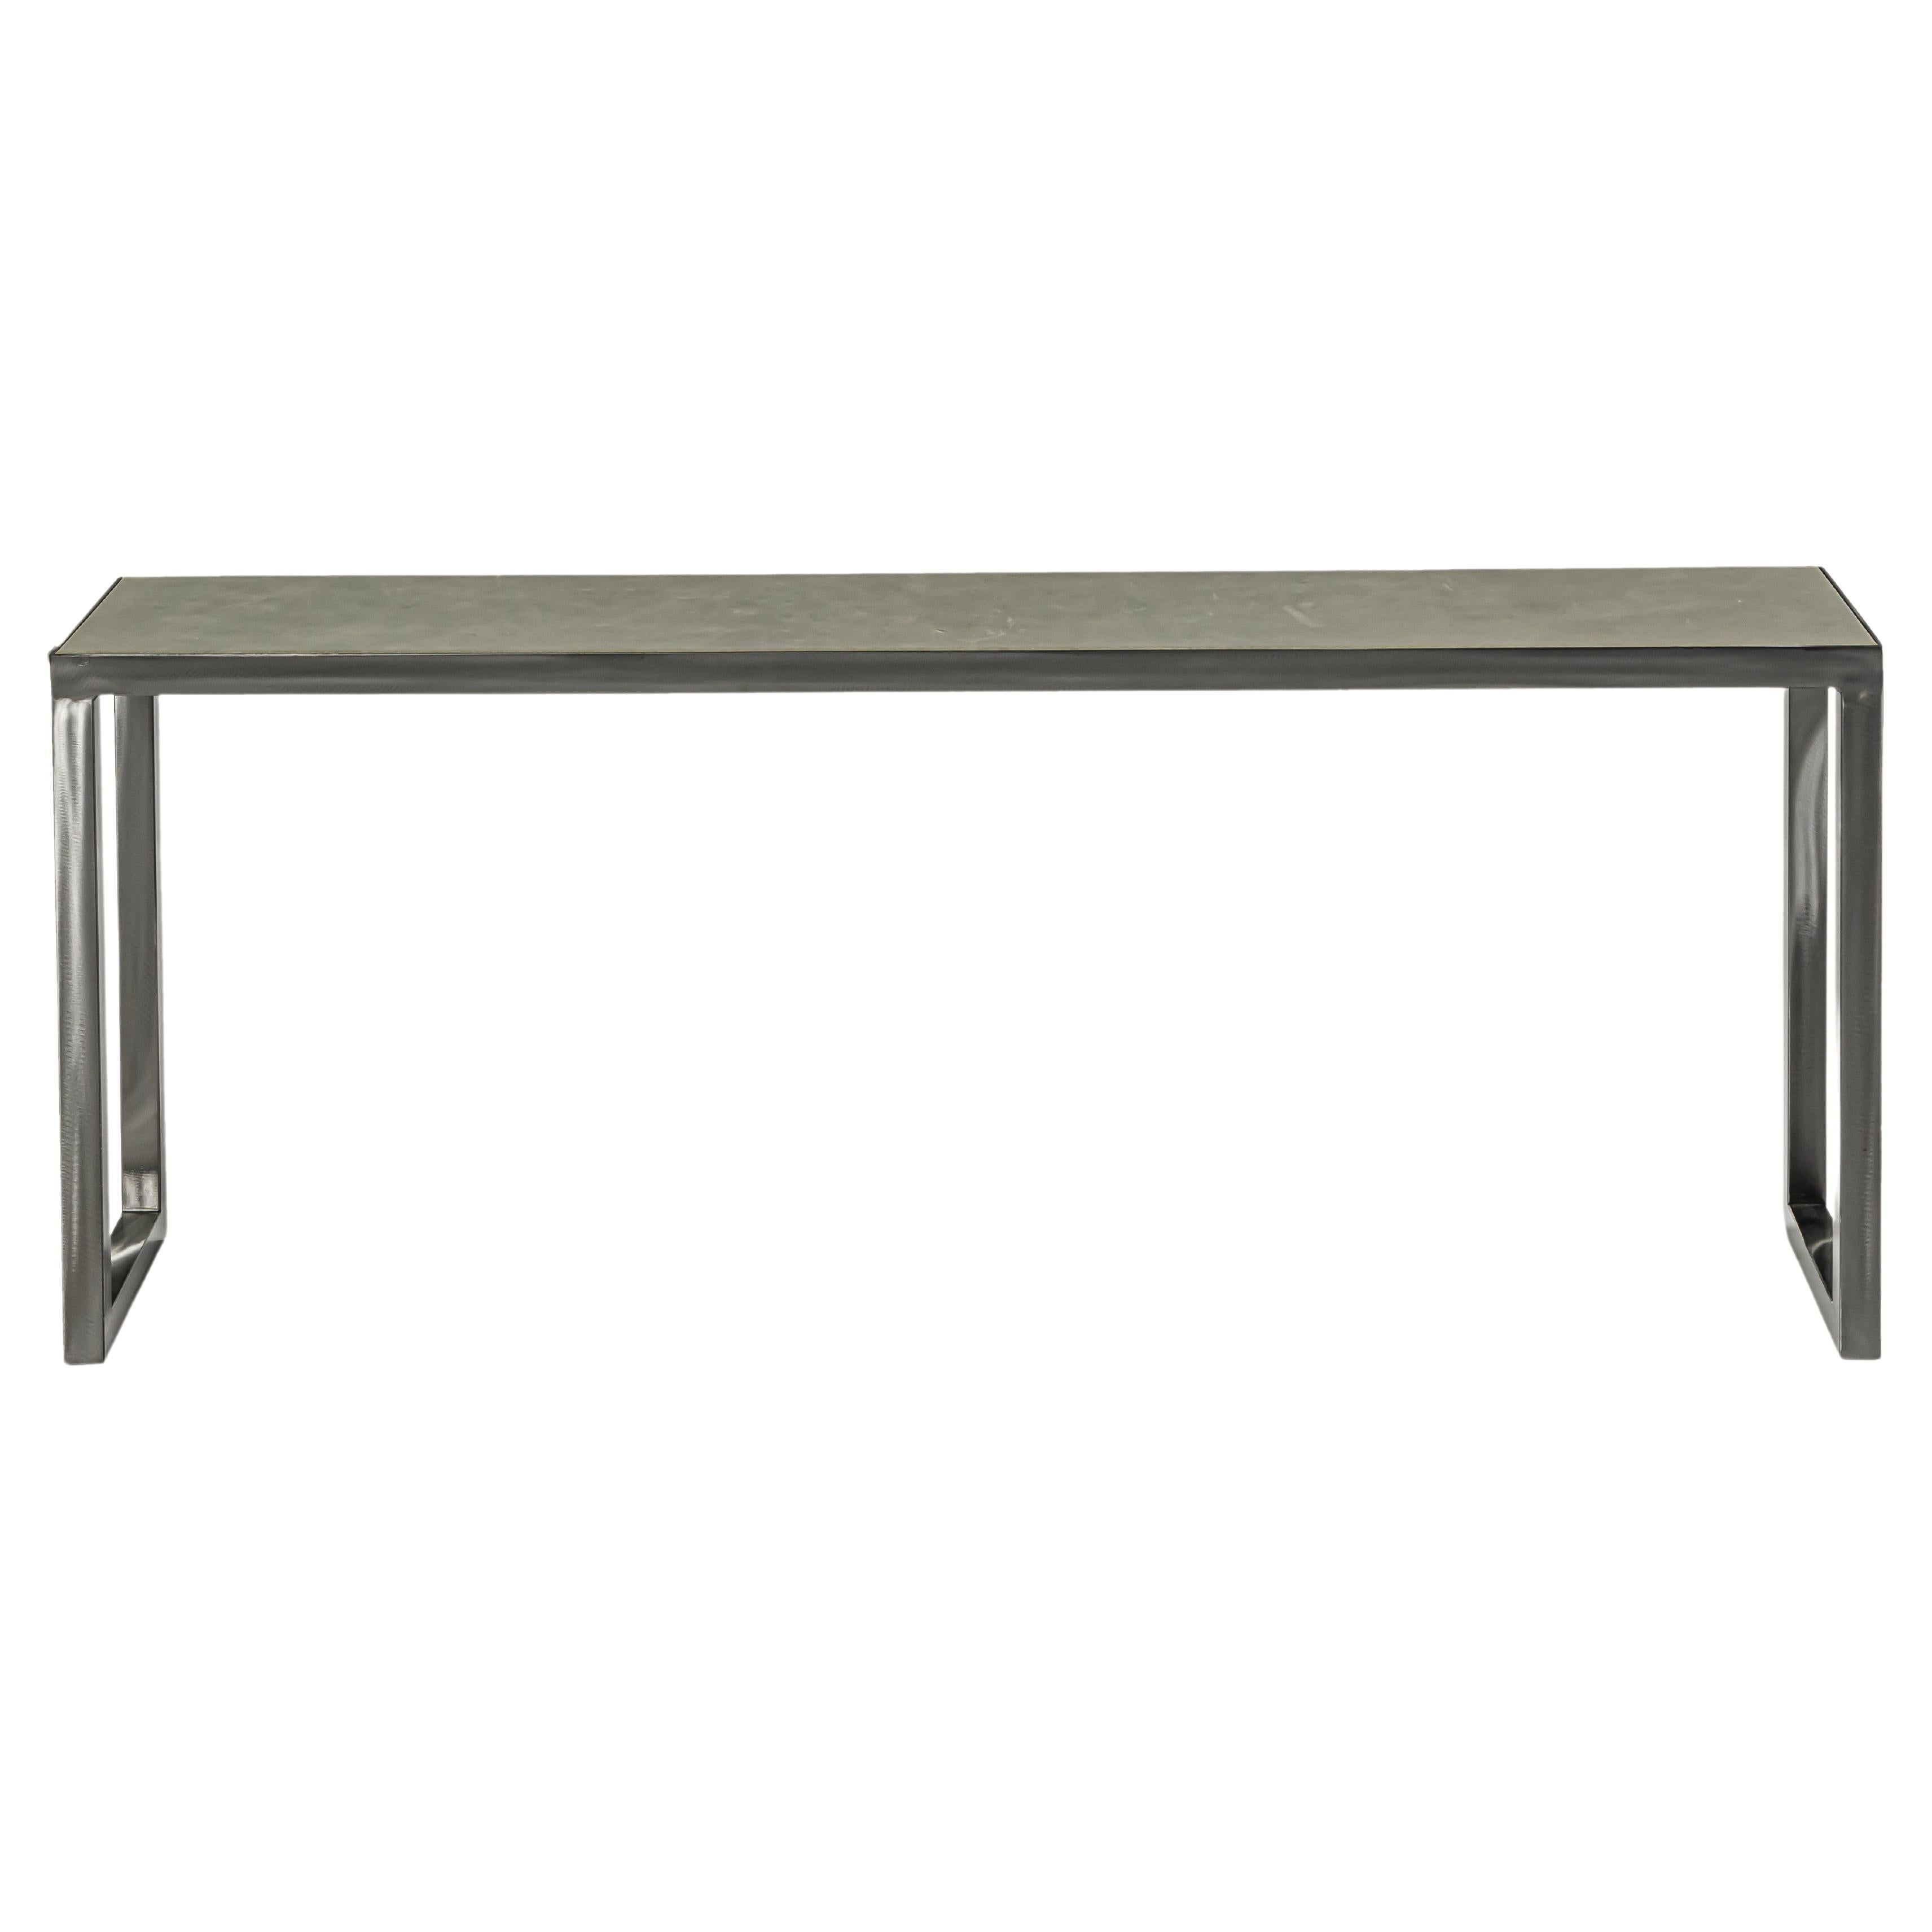 "Trinity Console" by Baxter, Leather/ Wood, Silver/ Gray Finish, Italy 2011 For Sale